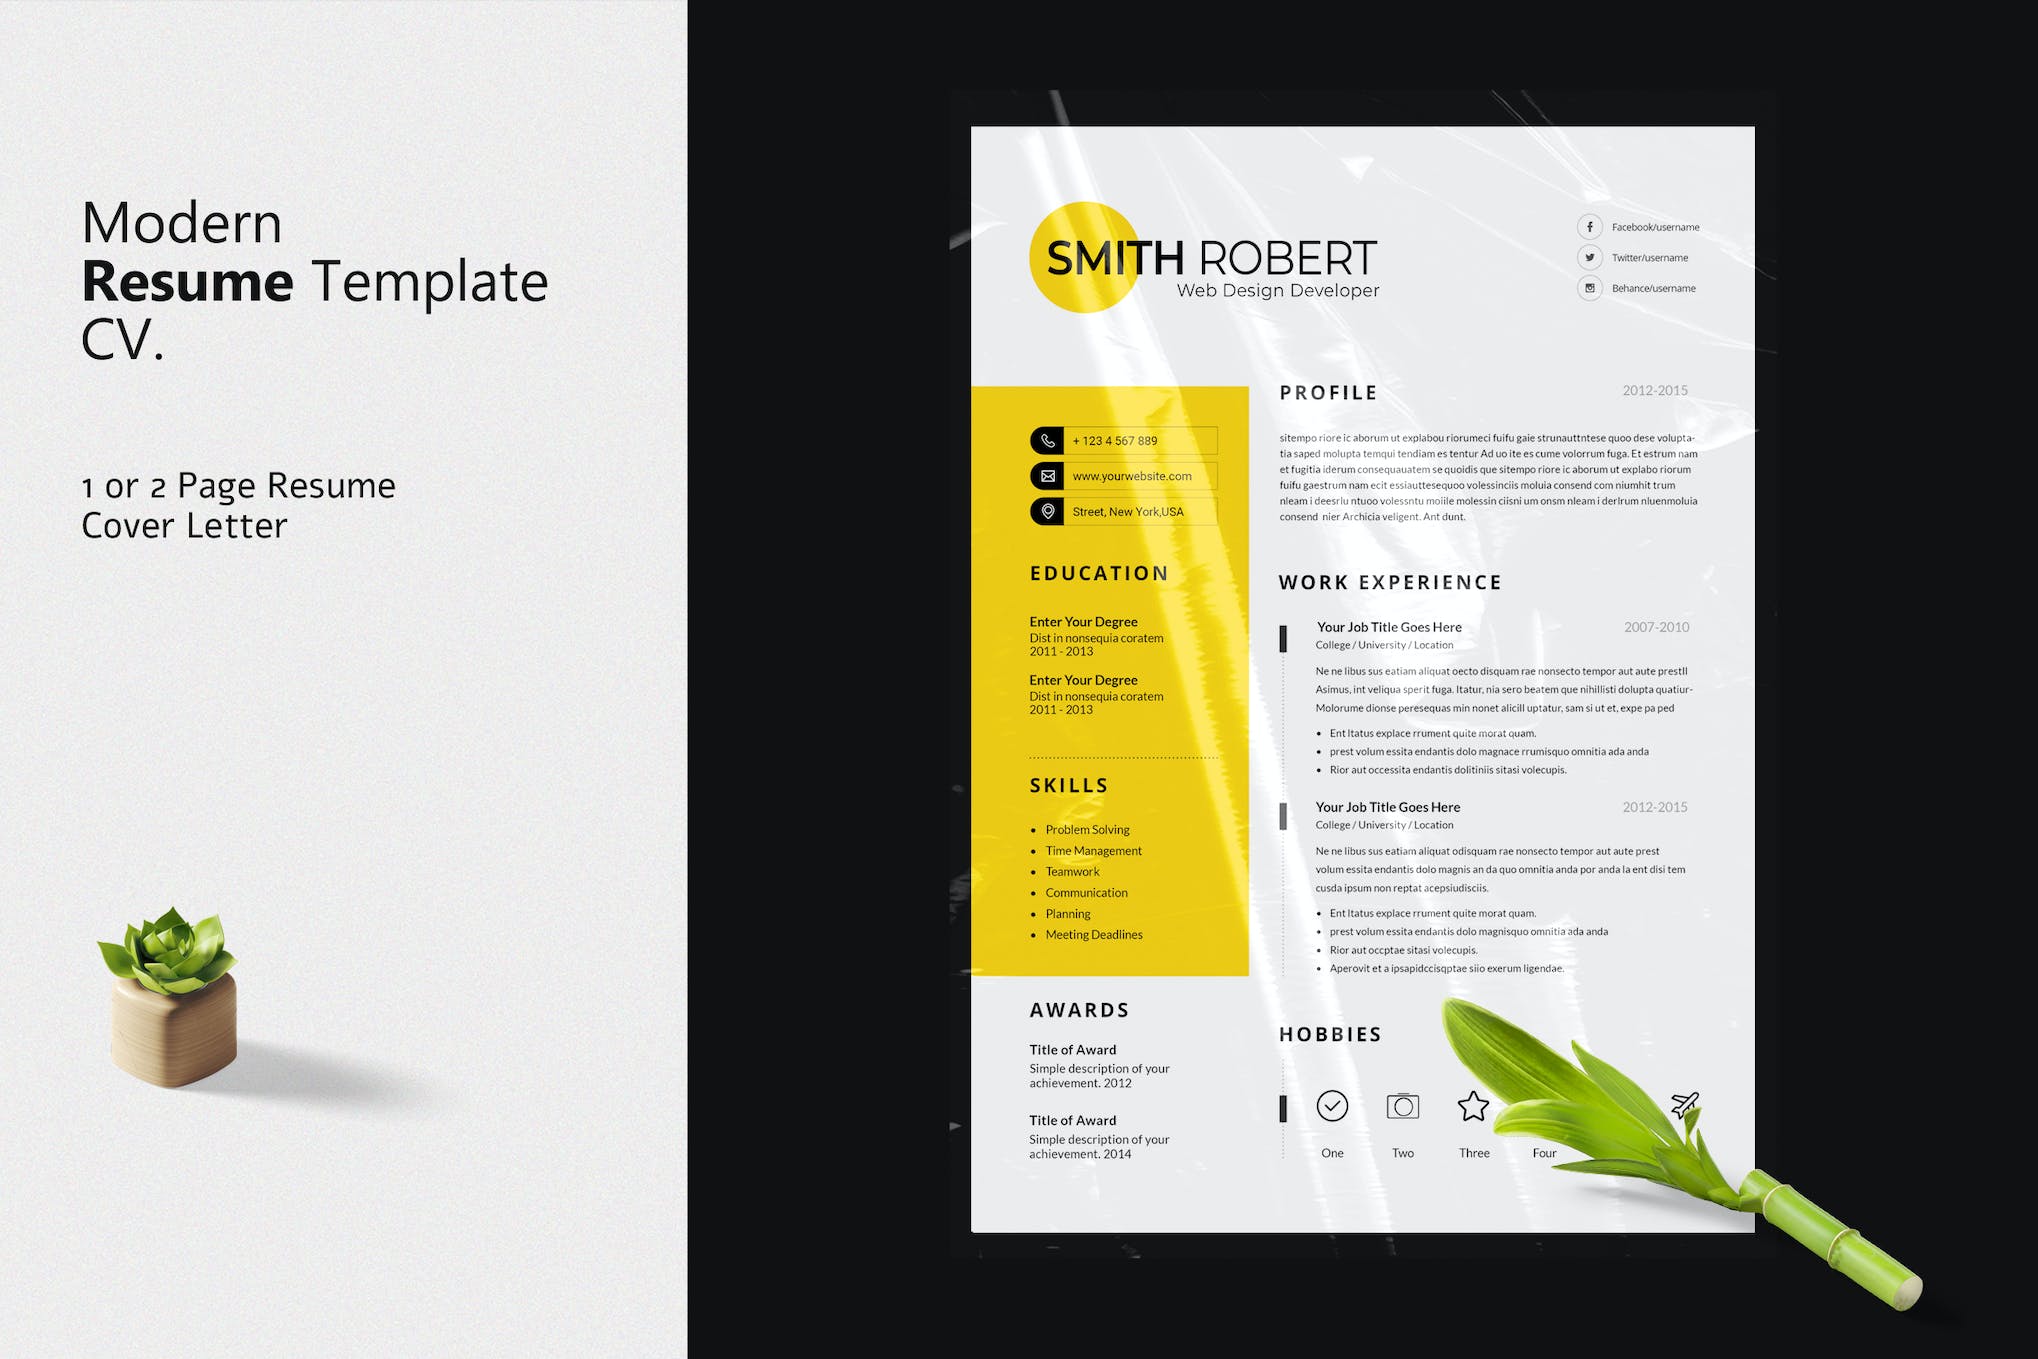 InDesign Resume Template for Developers